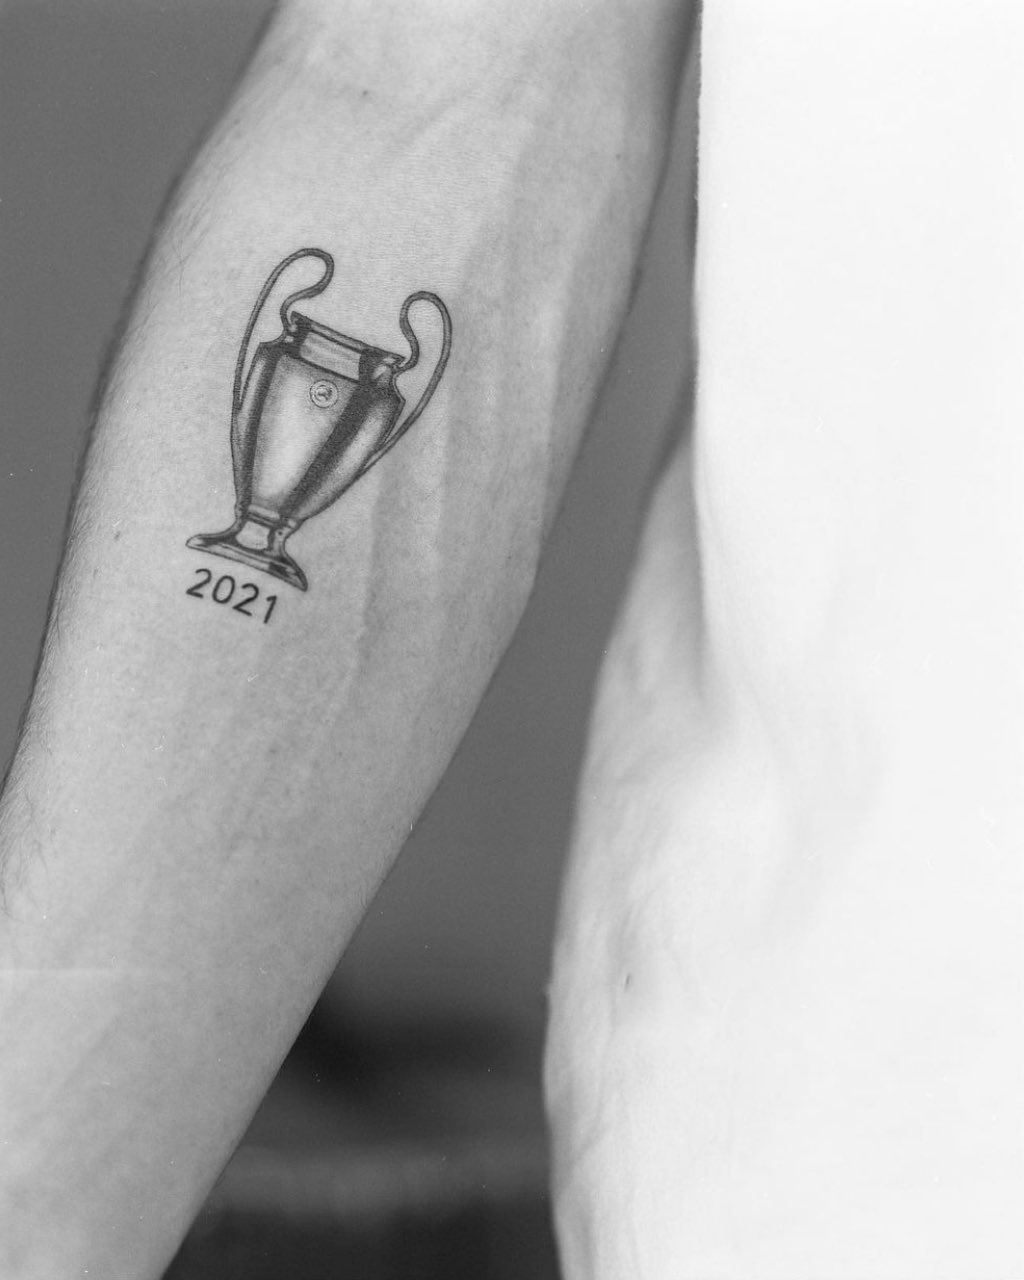 UEFA Europa League trophy tattoo located on Monchis